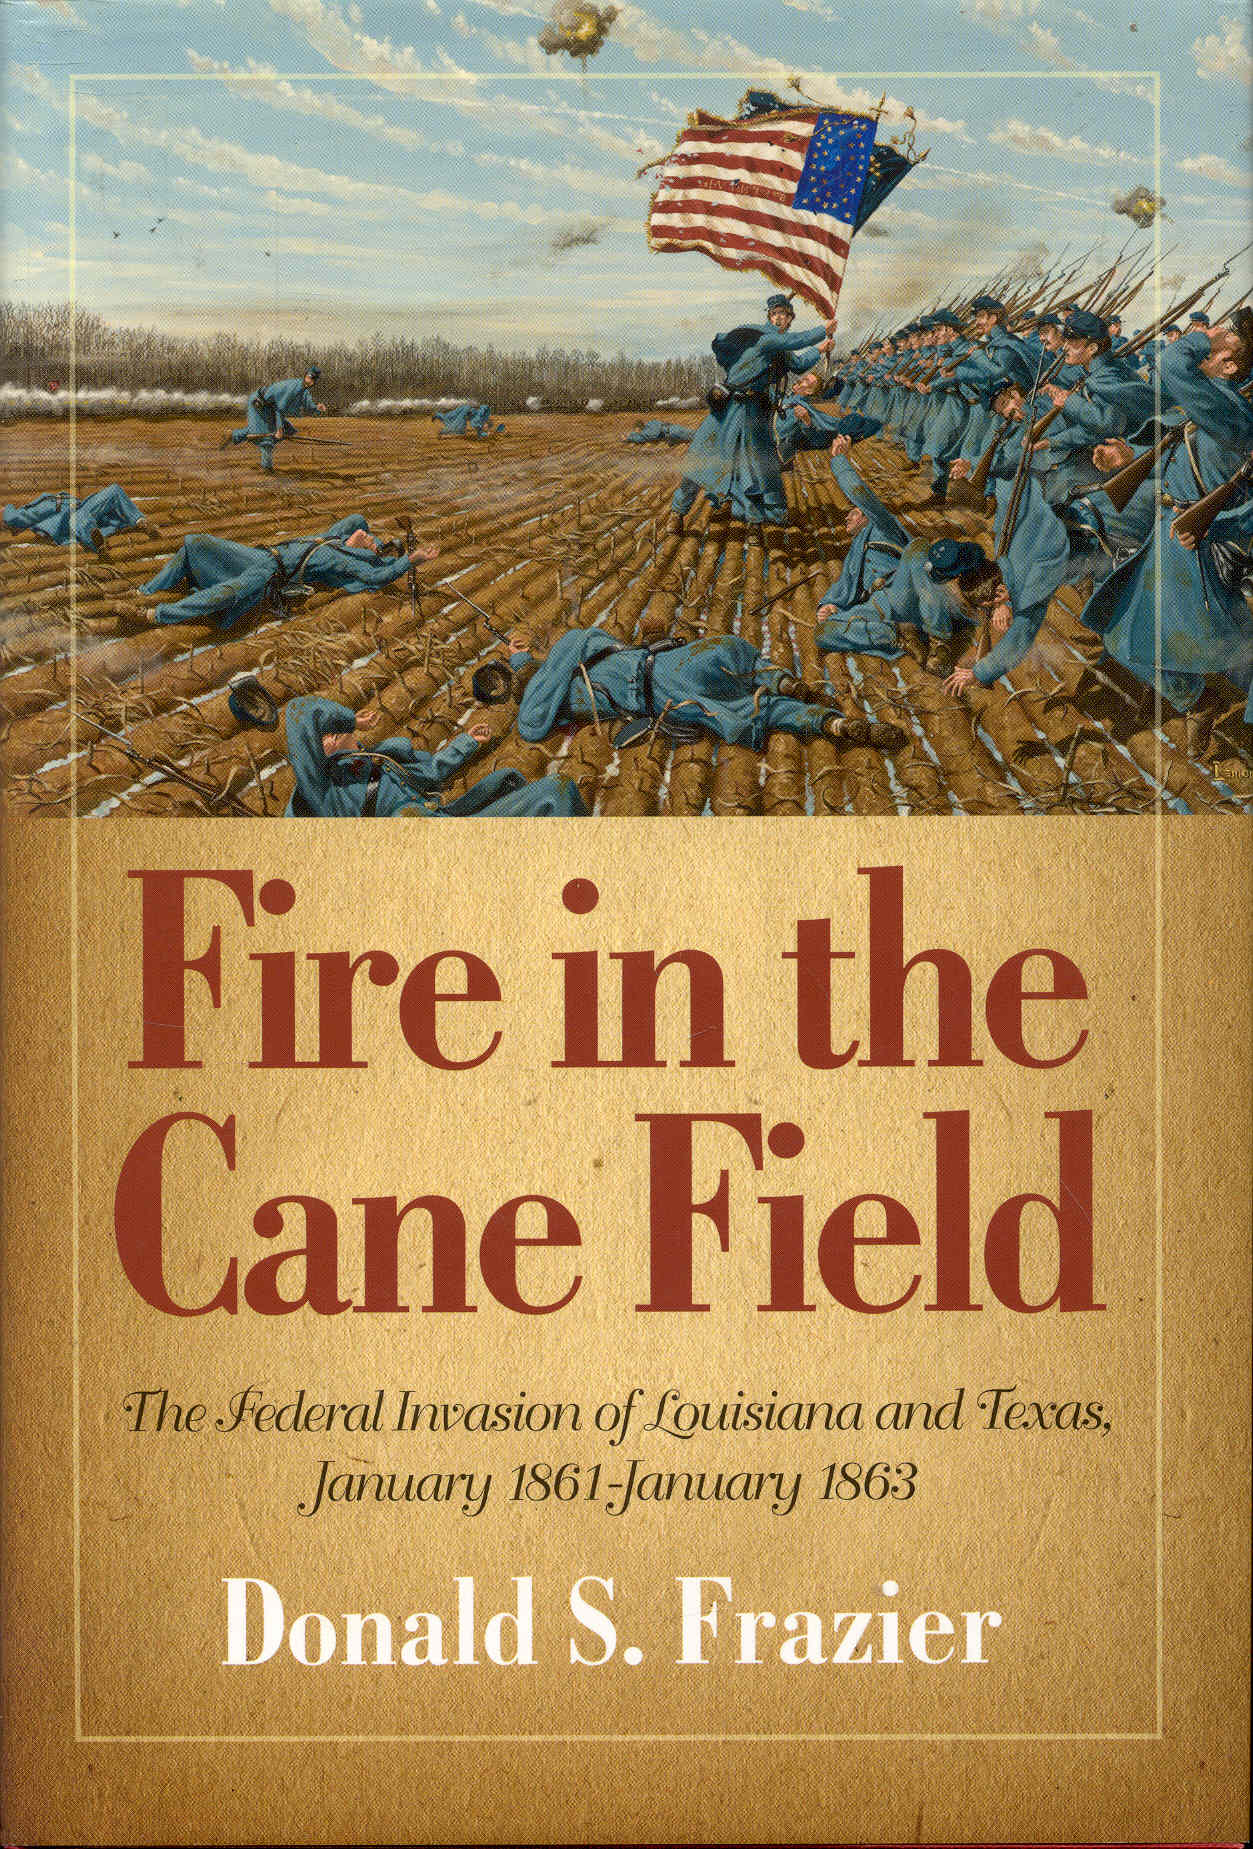 Image for Fire in the Cane Field: The Federal Invasion of Louisiana and Texas, January 1861-January 1863